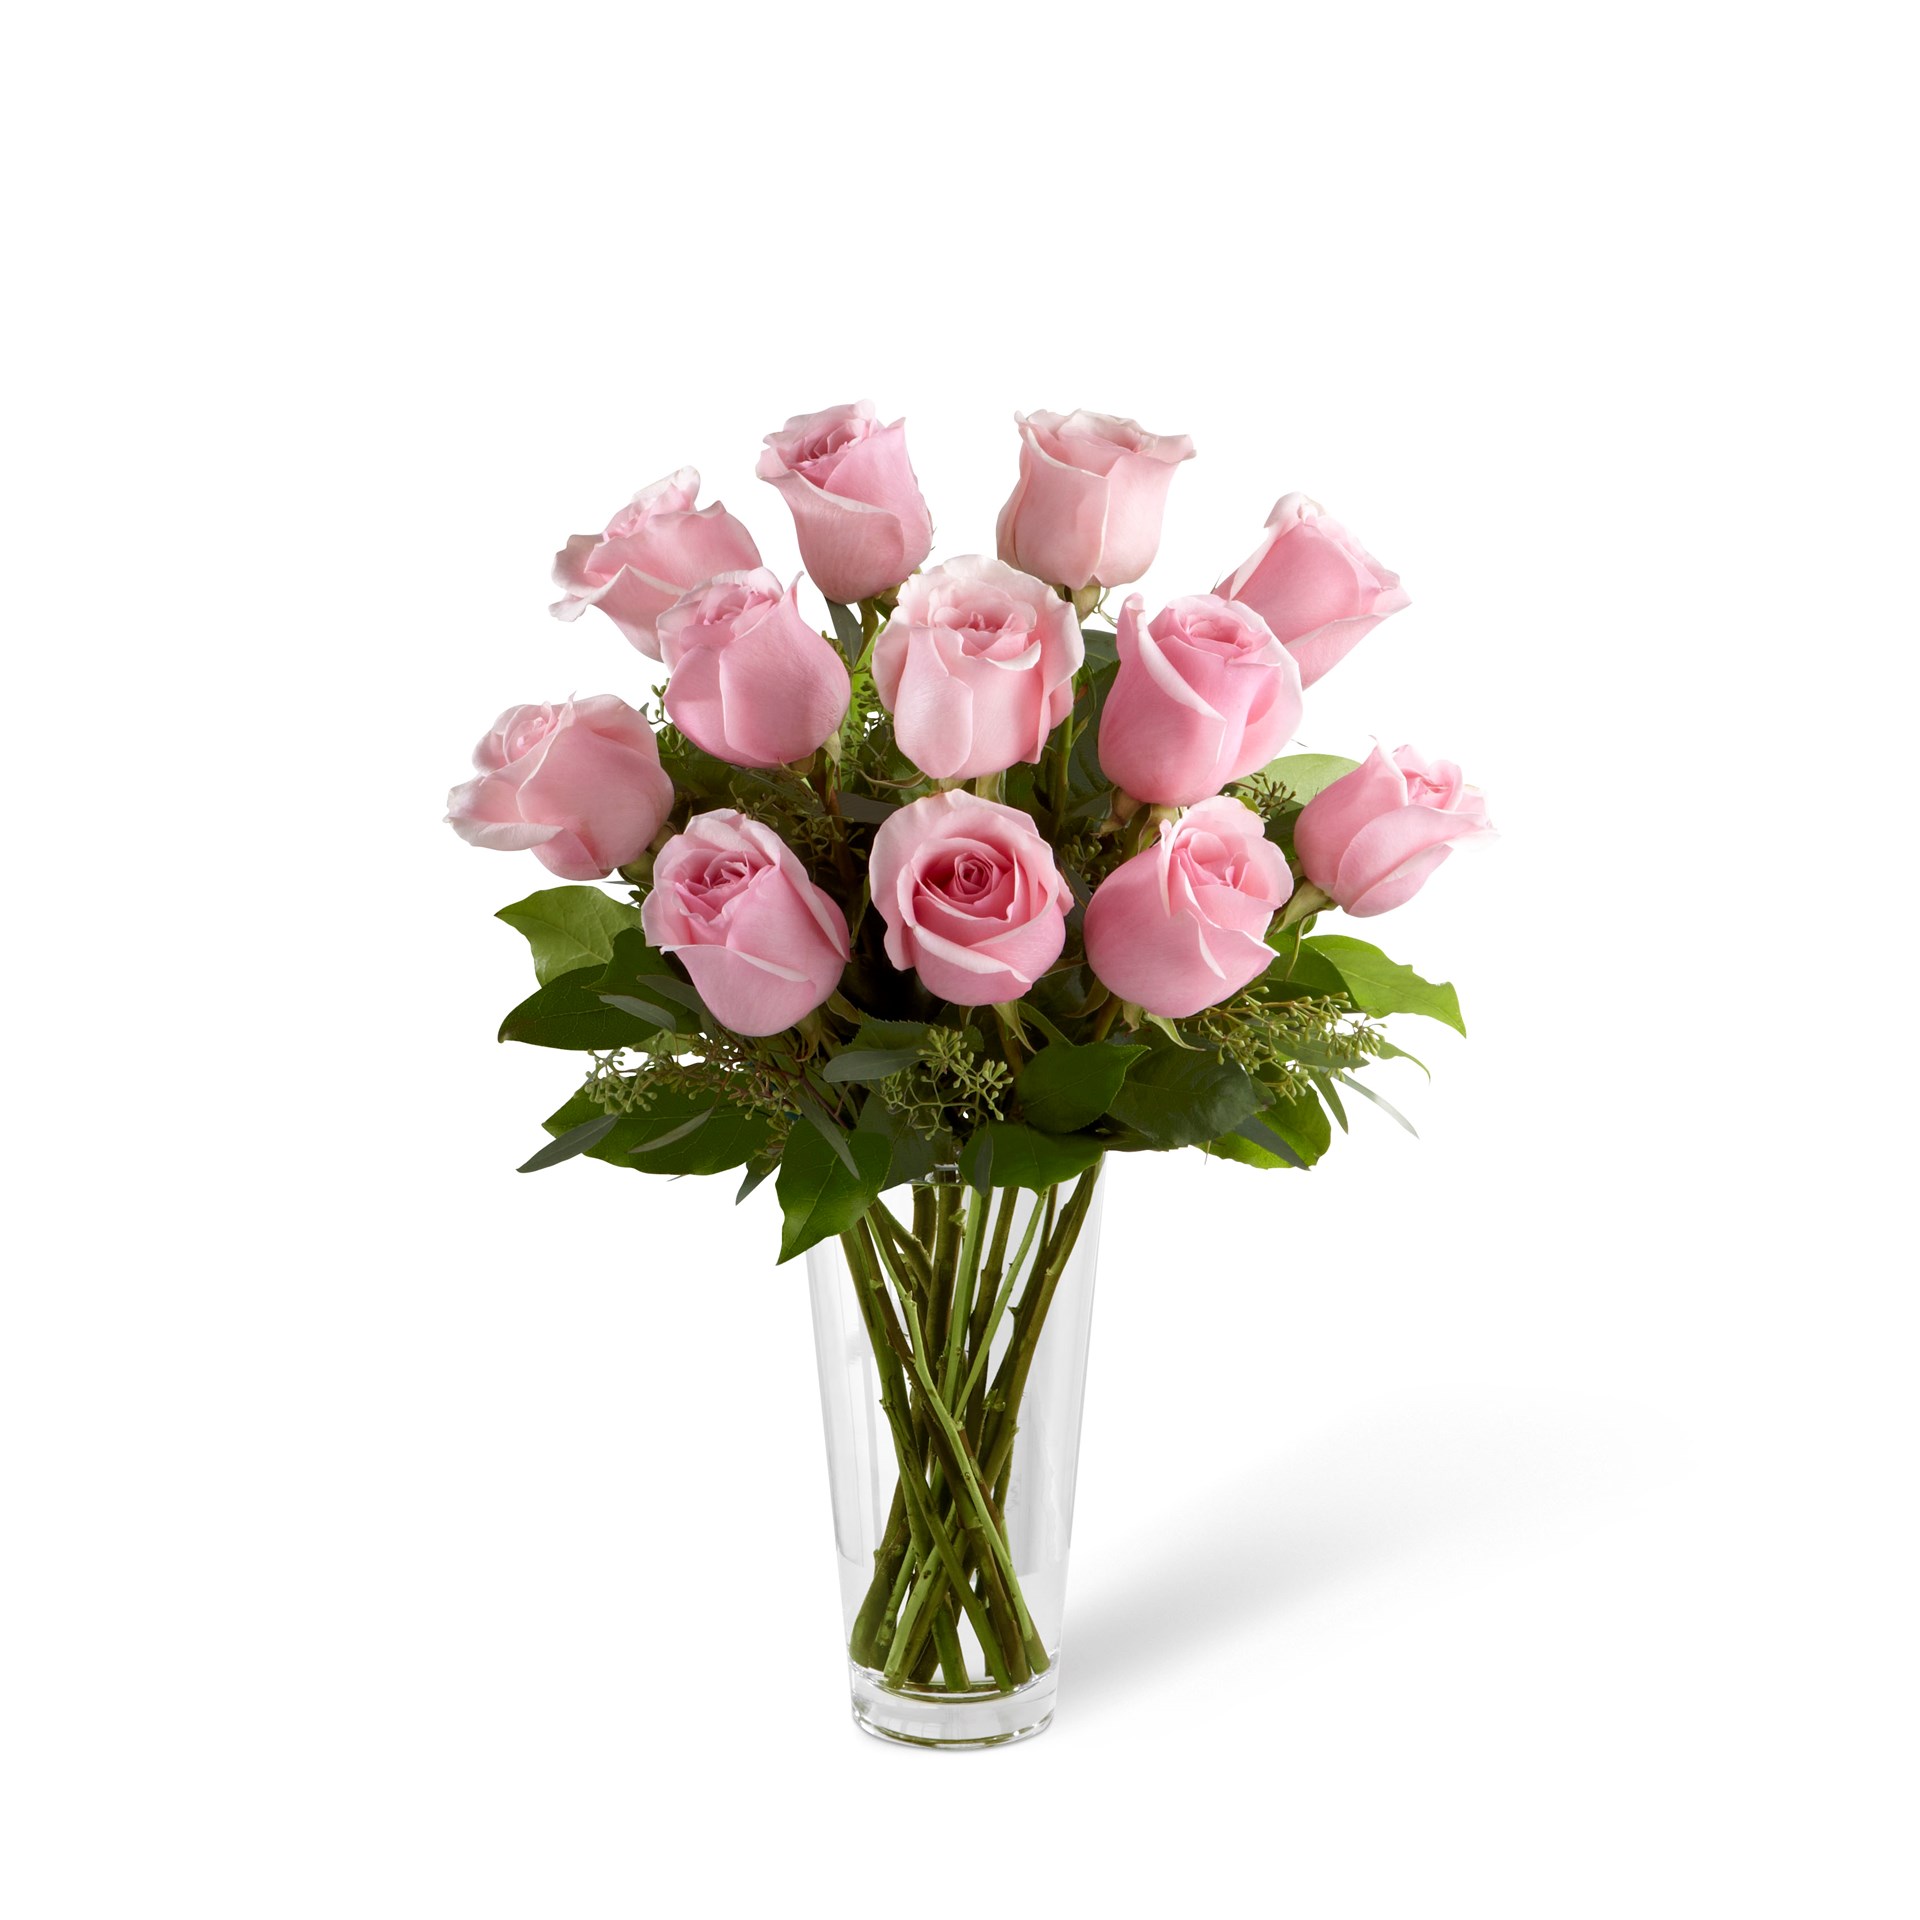 product image for The Long Stem Pink Rose Bouquet by FTD